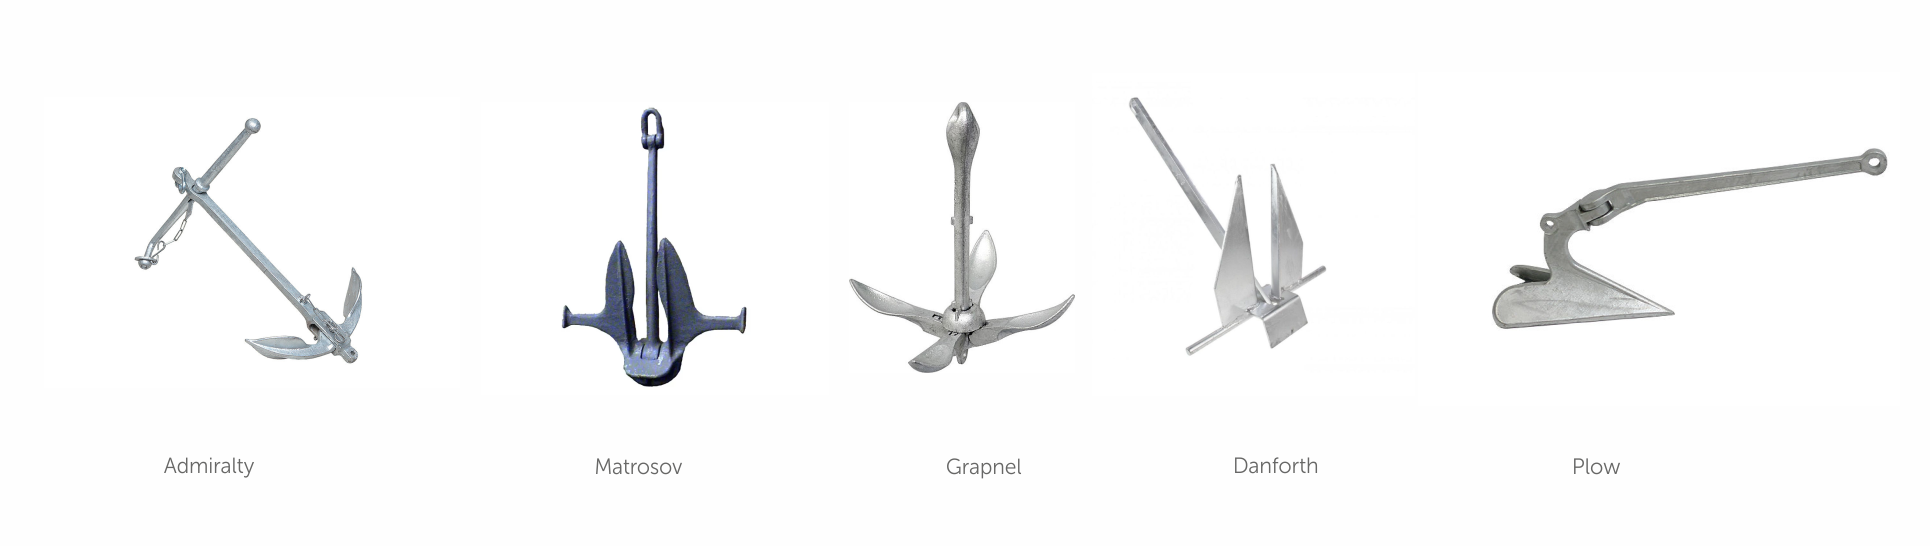 Choosing an anchor: types of yachting anchors